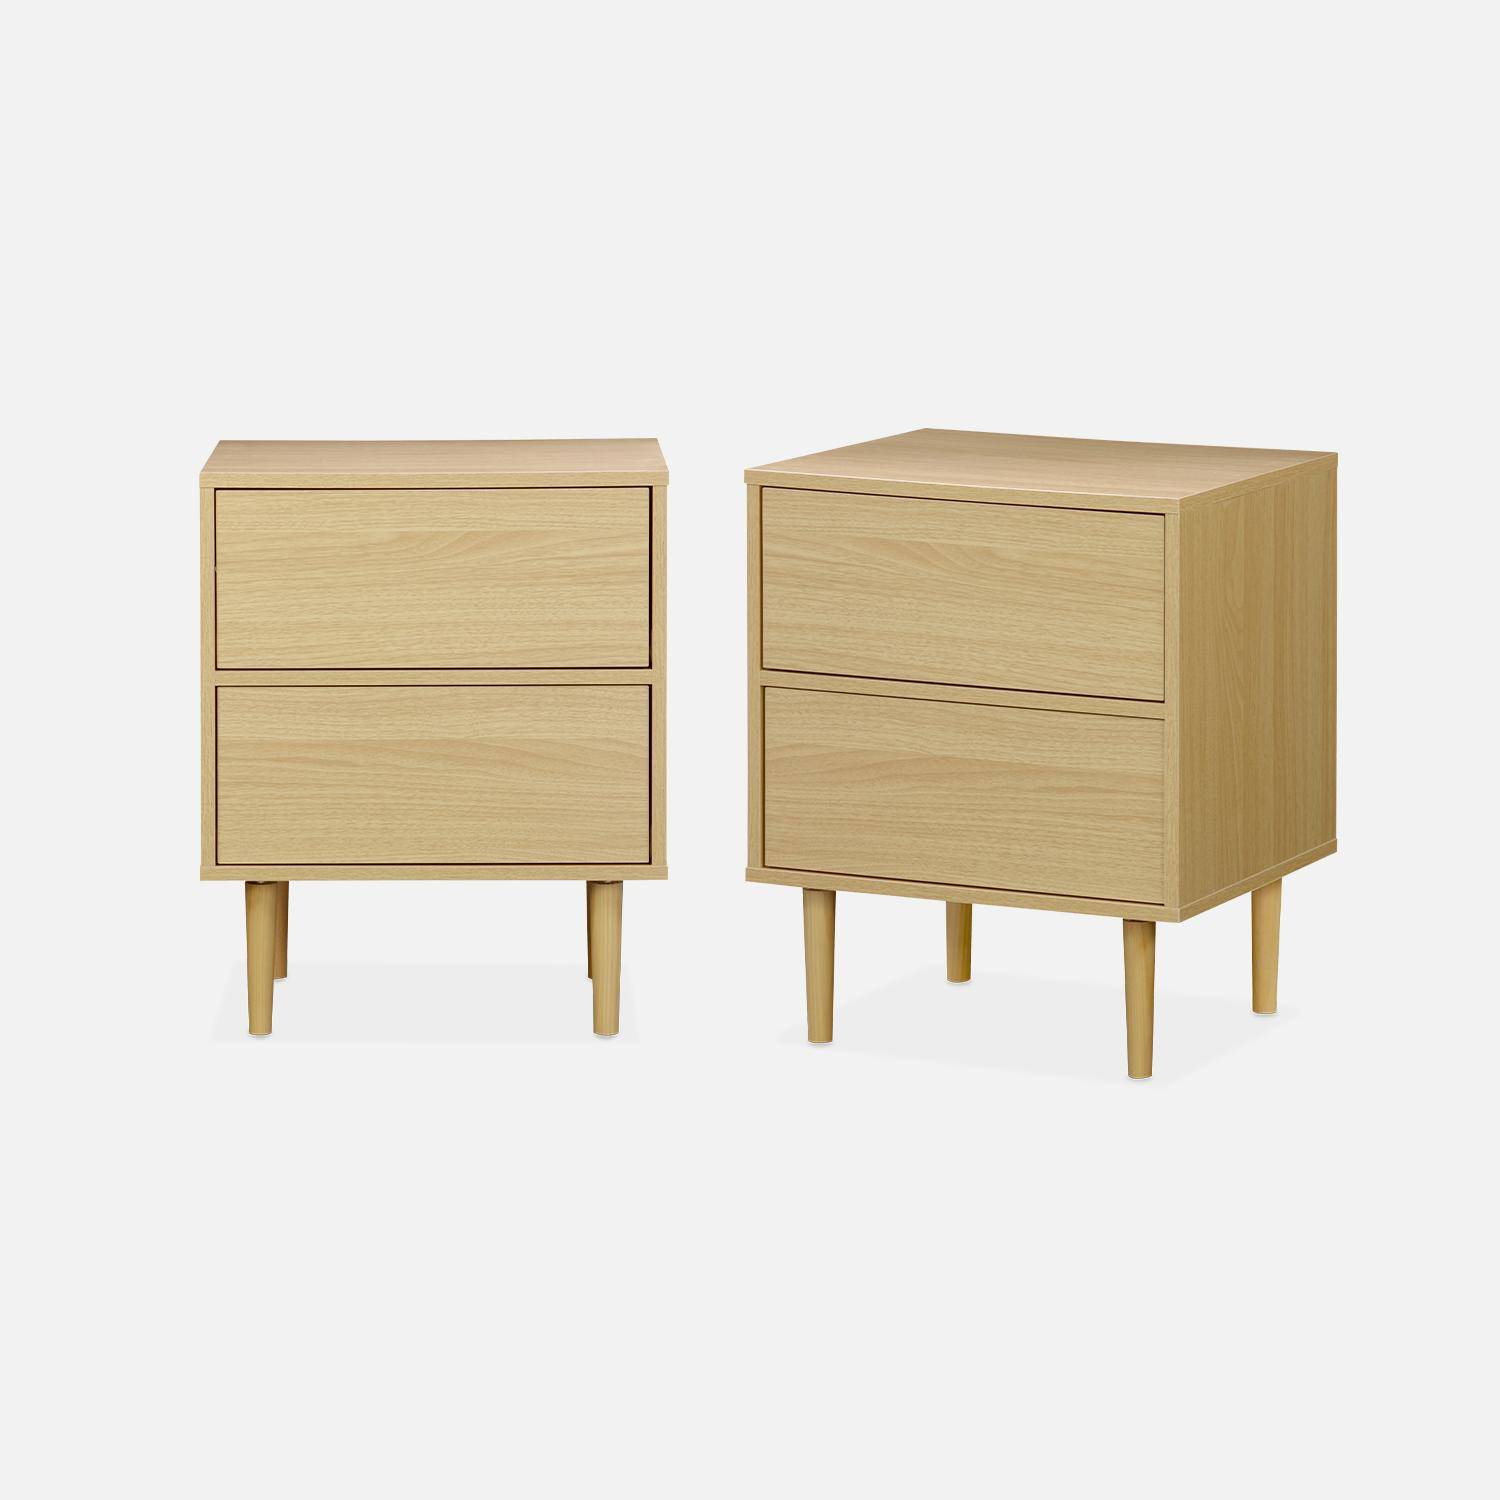 Pair of wood-effect bedside tables with two drawers, 48x40x59cm - Mika - Natural Wood Photo3